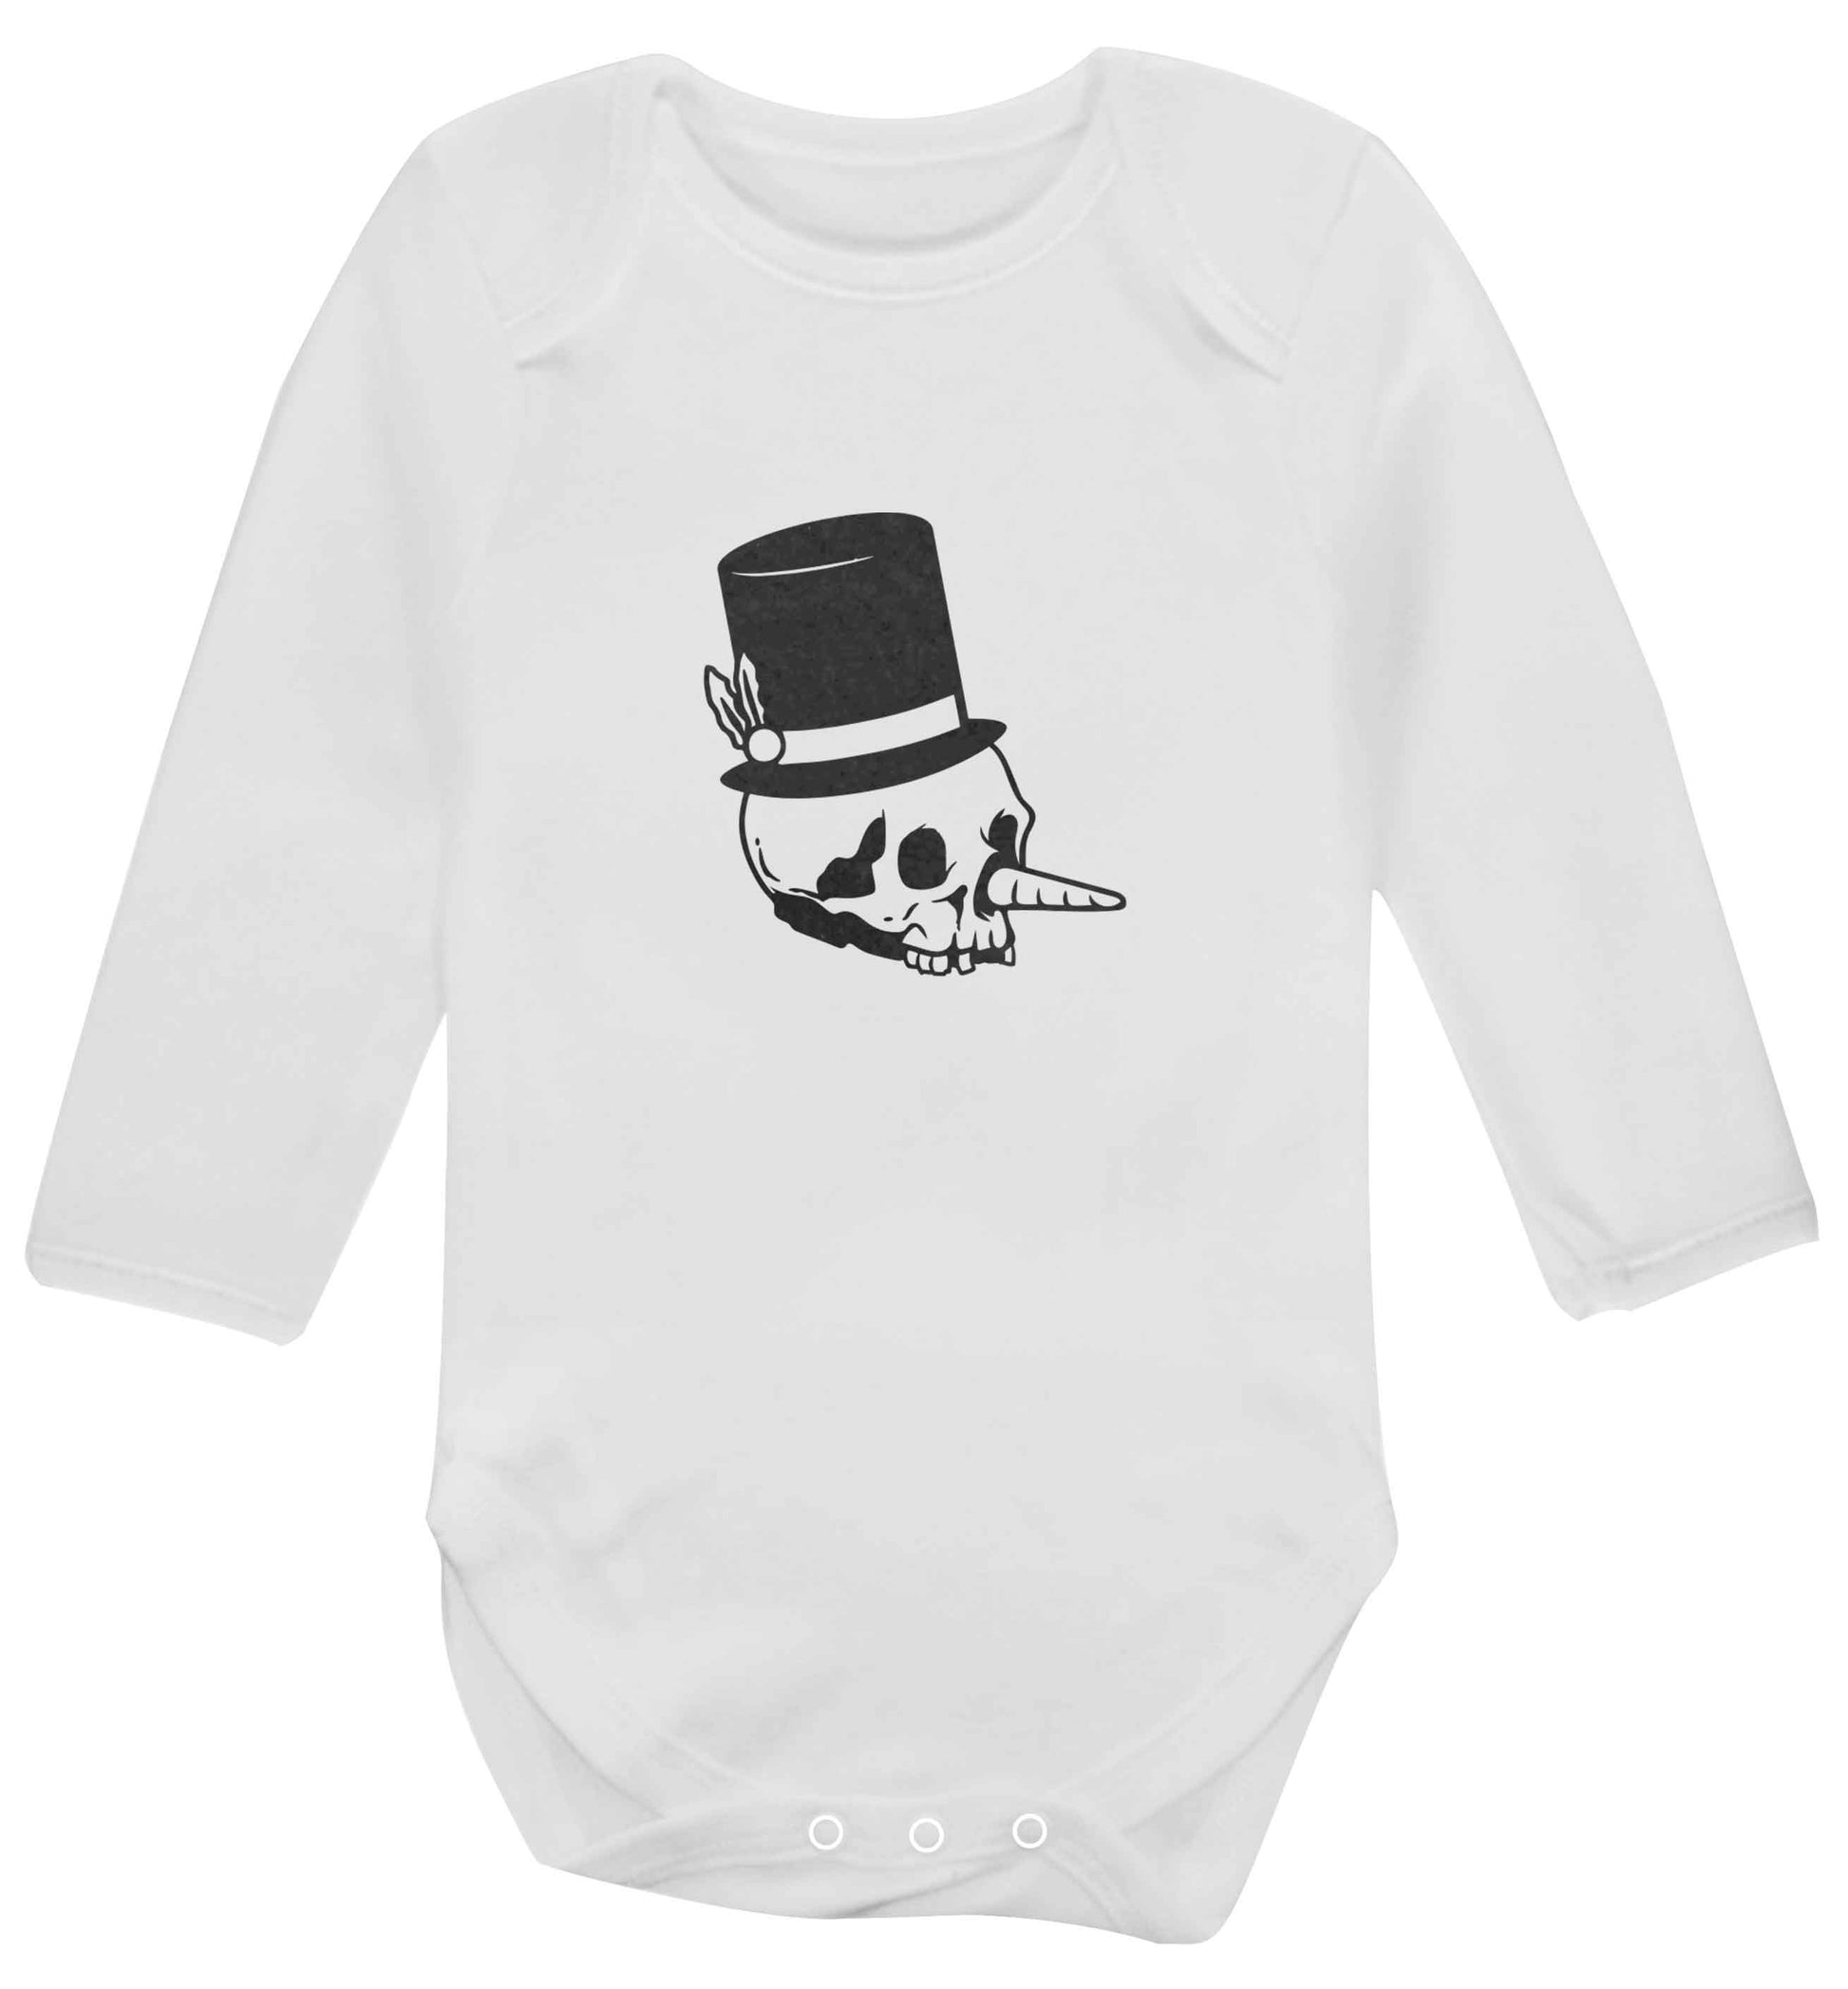 Snowman punk baby vest long sleeved white 6-12 months